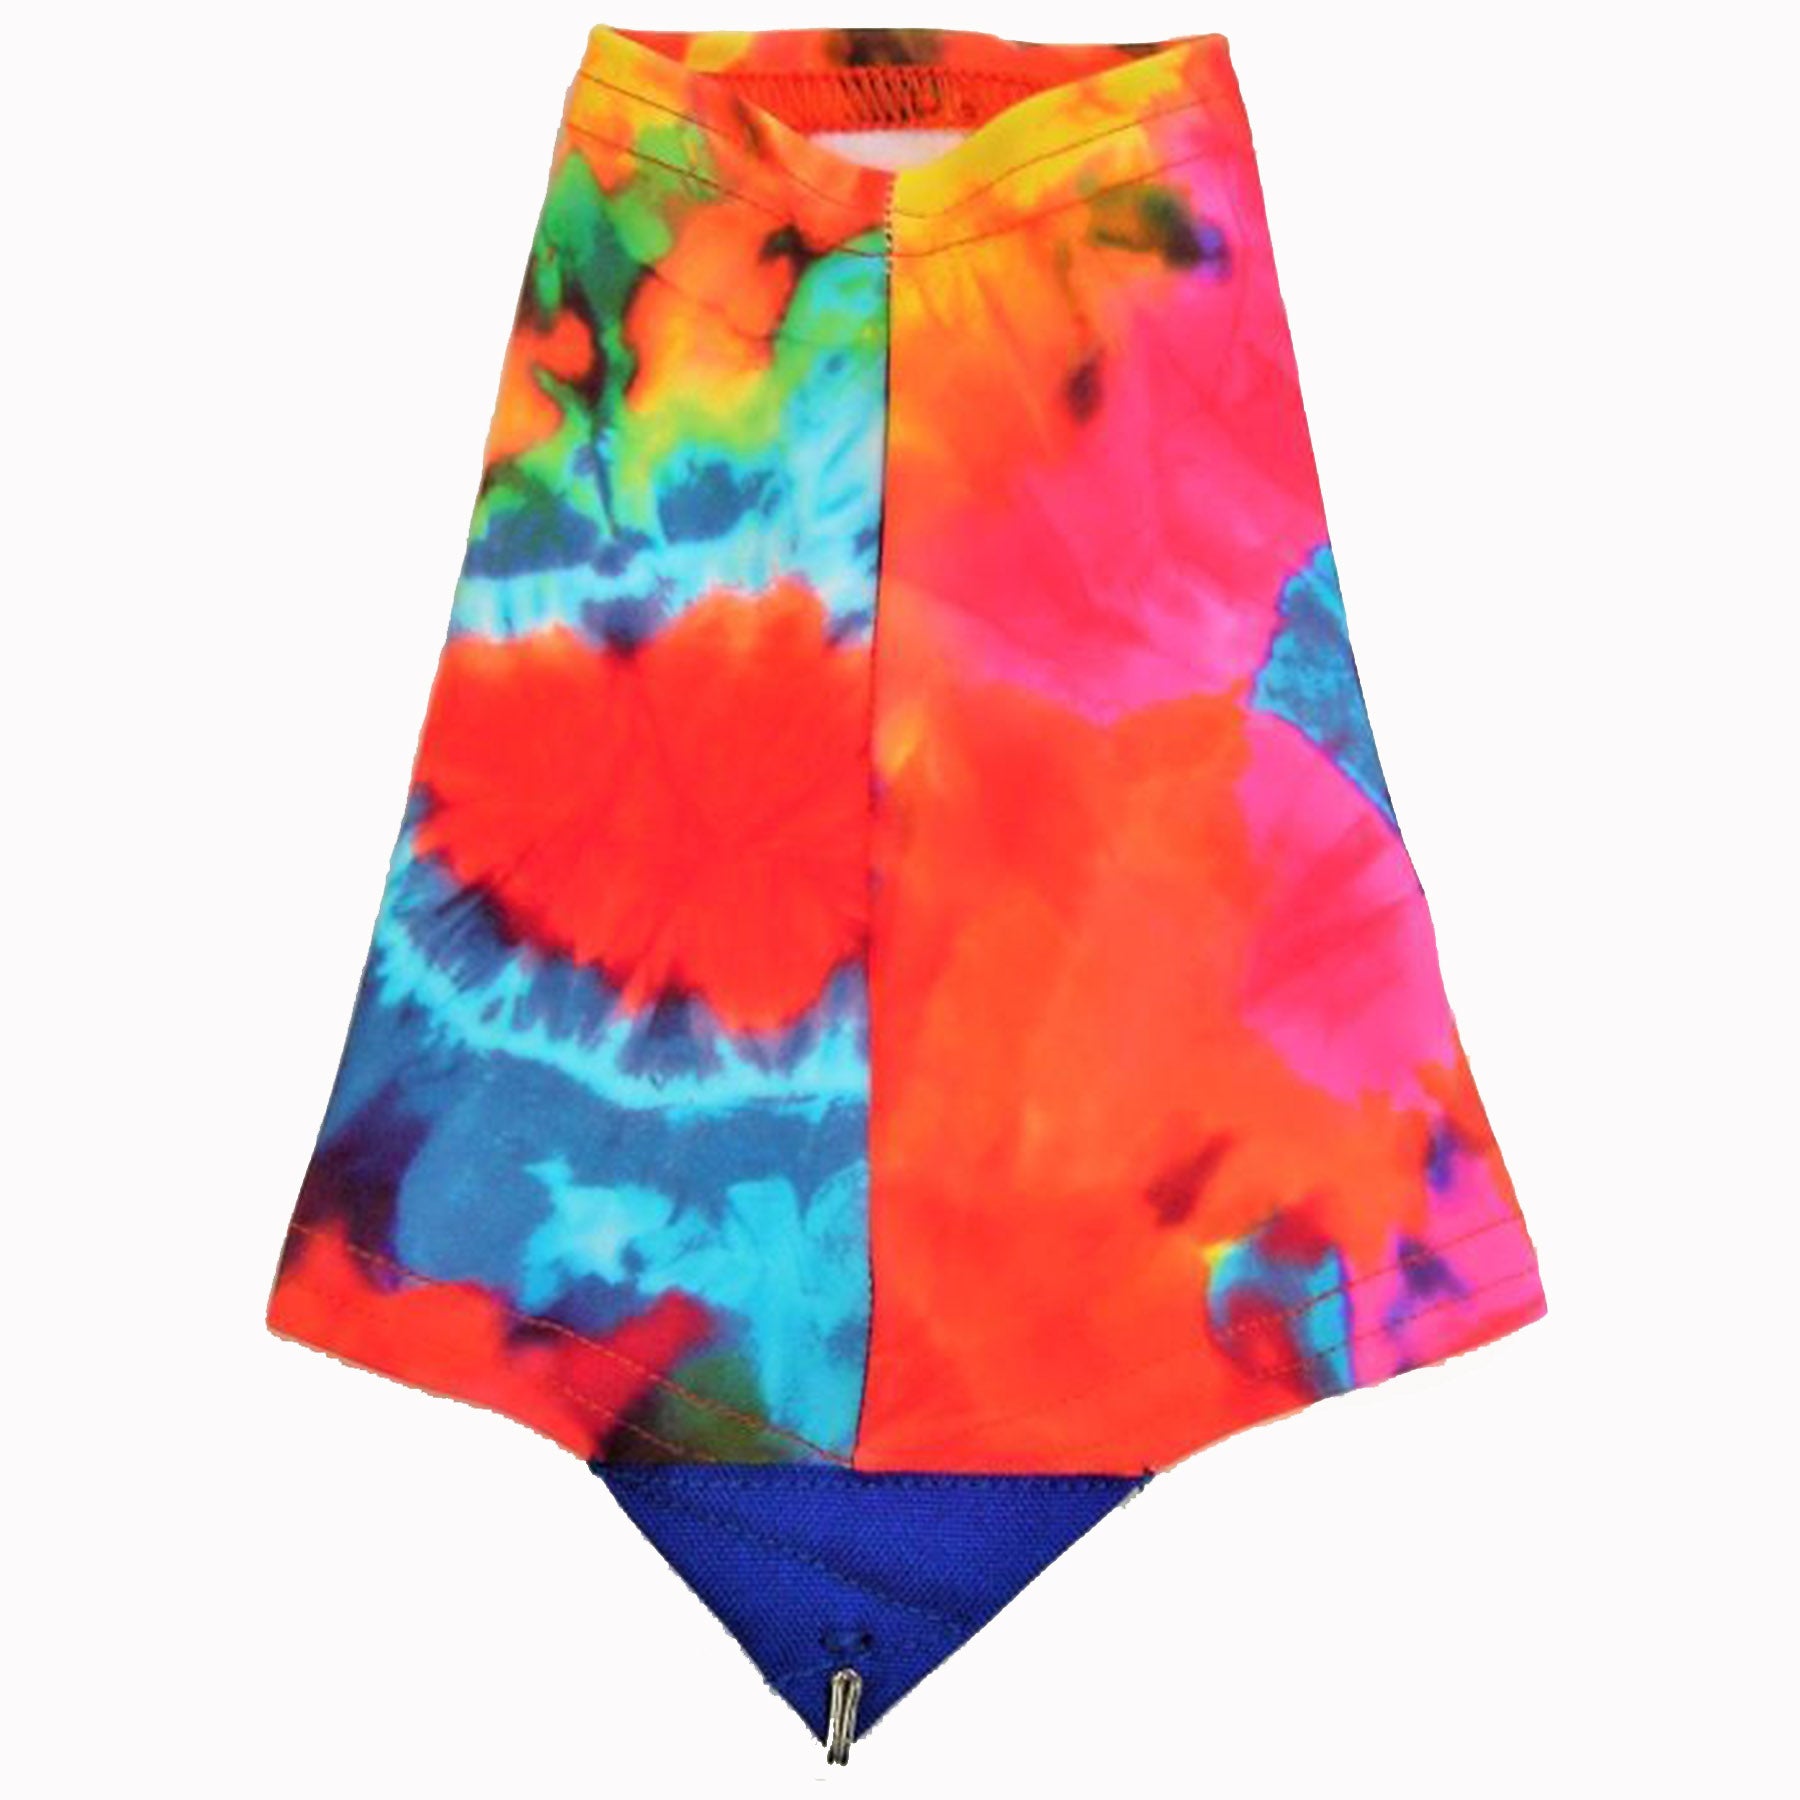 wild red and blues like tie dye make the runner's high gaiter